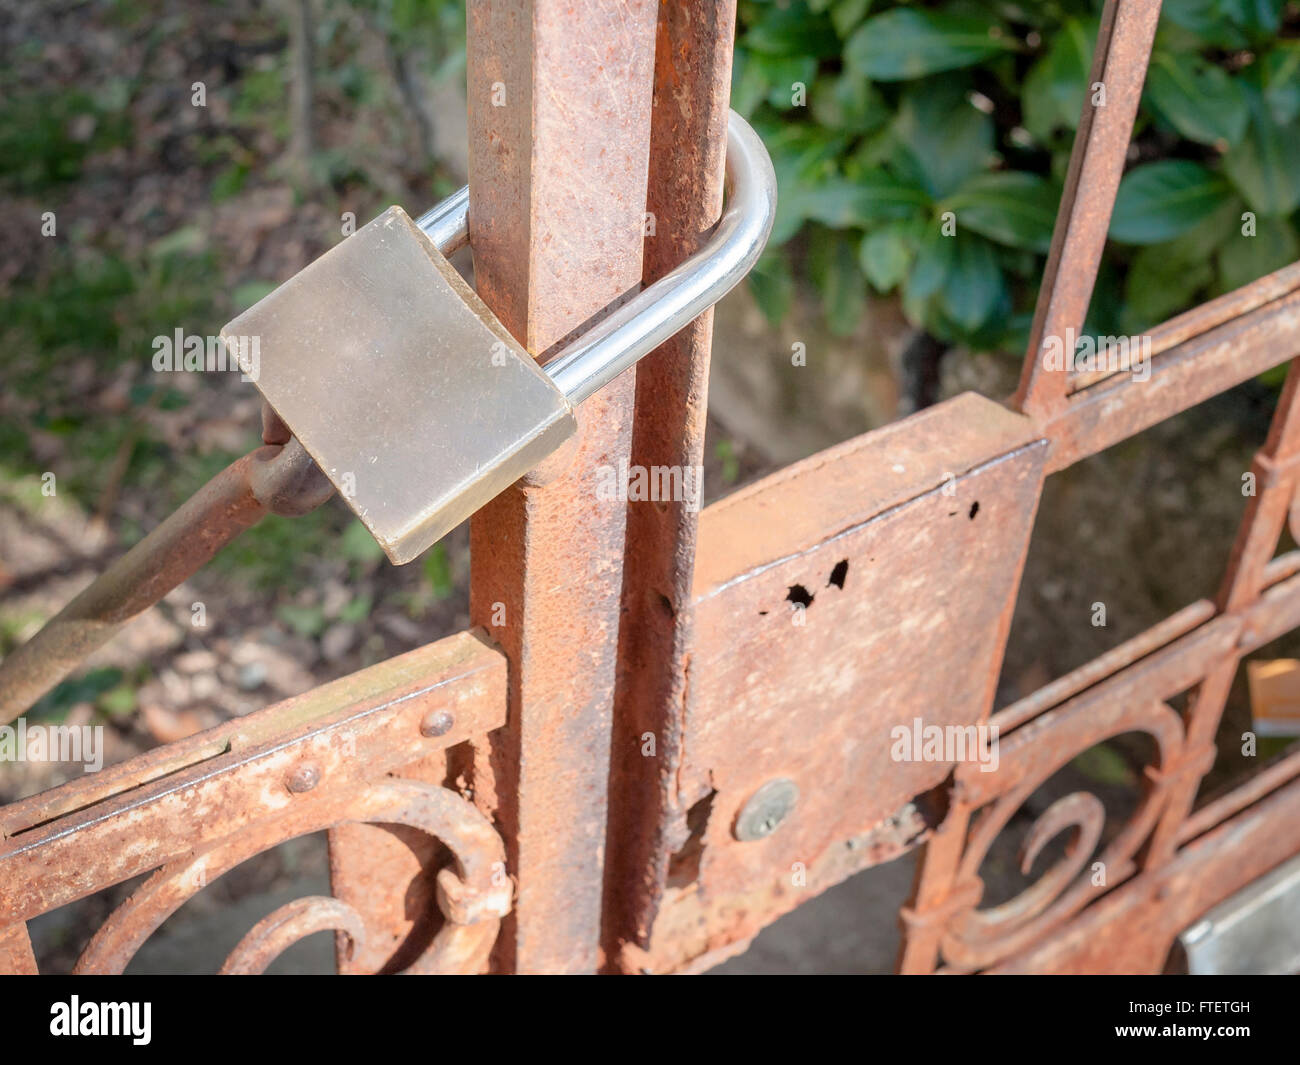 Rusty metal gate closed with padlock - concept image Stock Photo